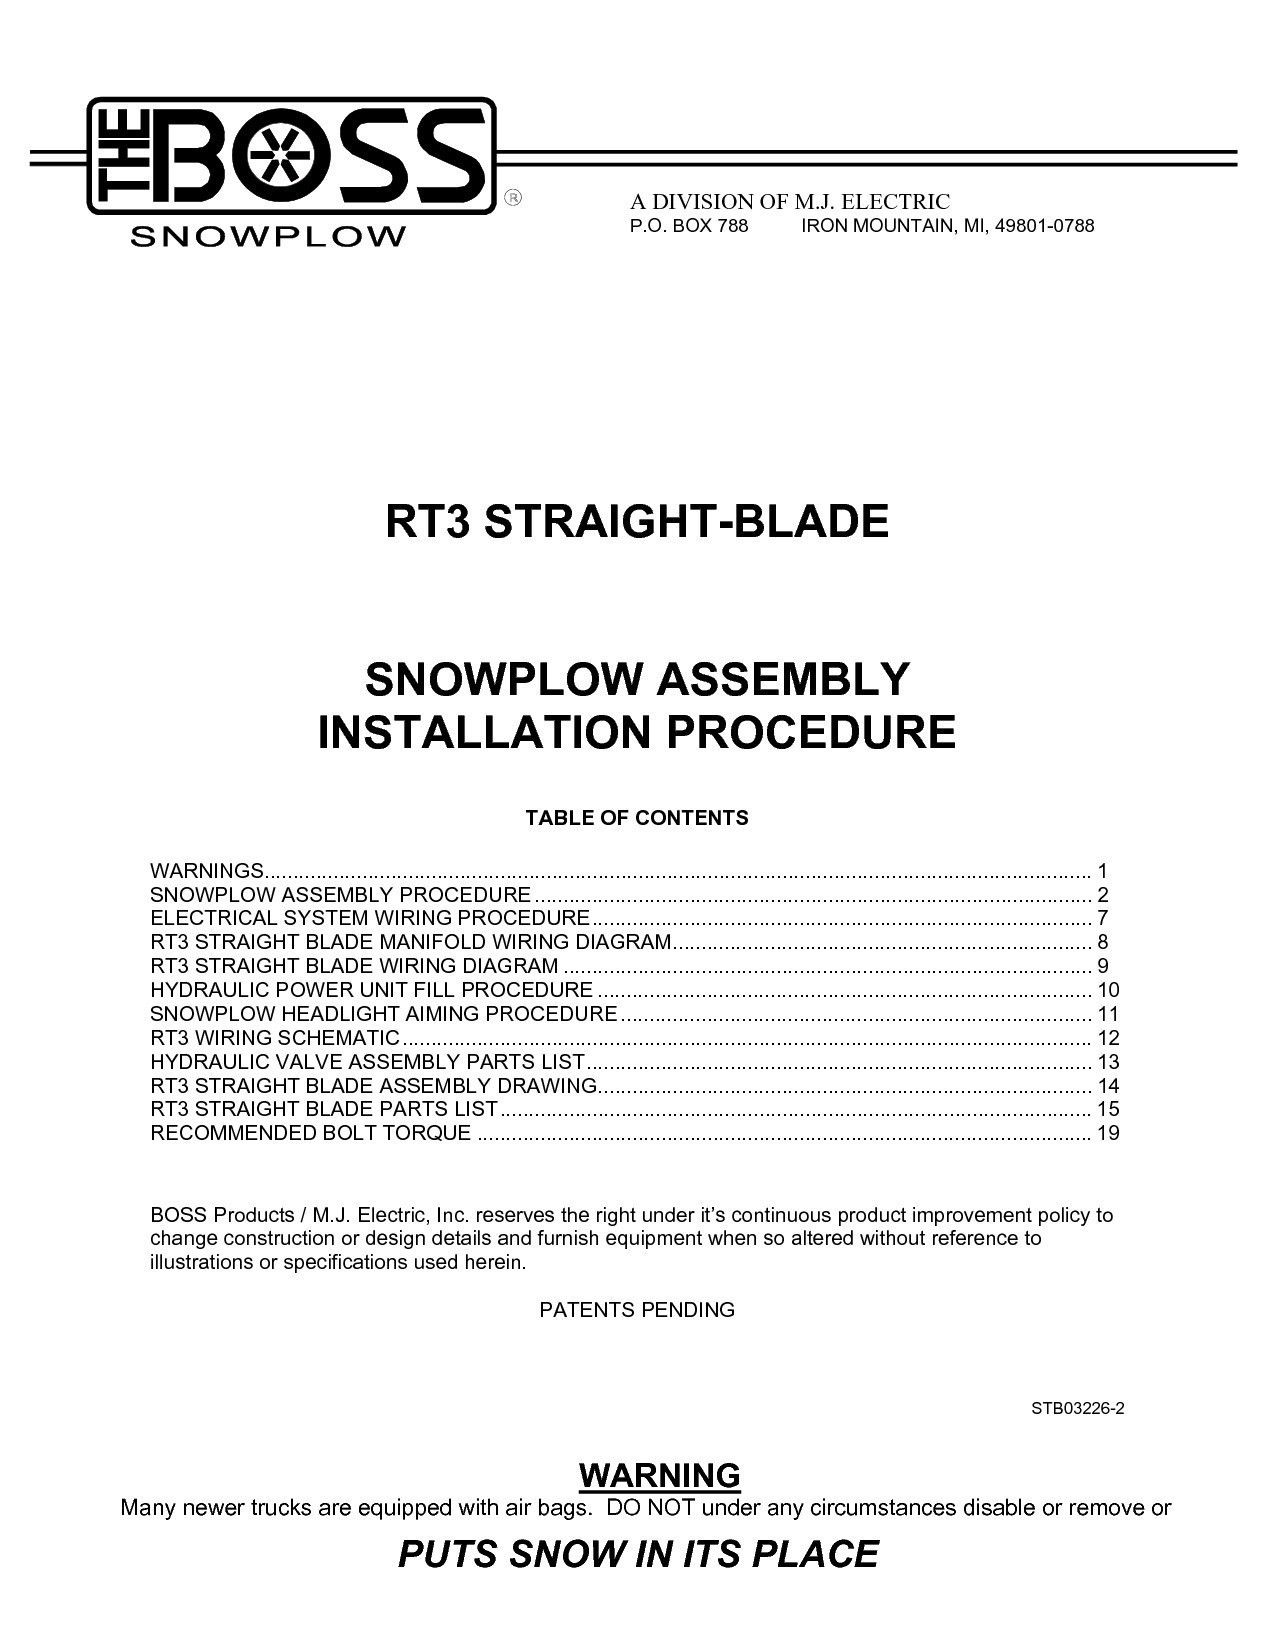 Snow Plow Wiring Diagram Valid Colorful Boss Snow Plow Wiring Diagram Ideas Electrical Circuit